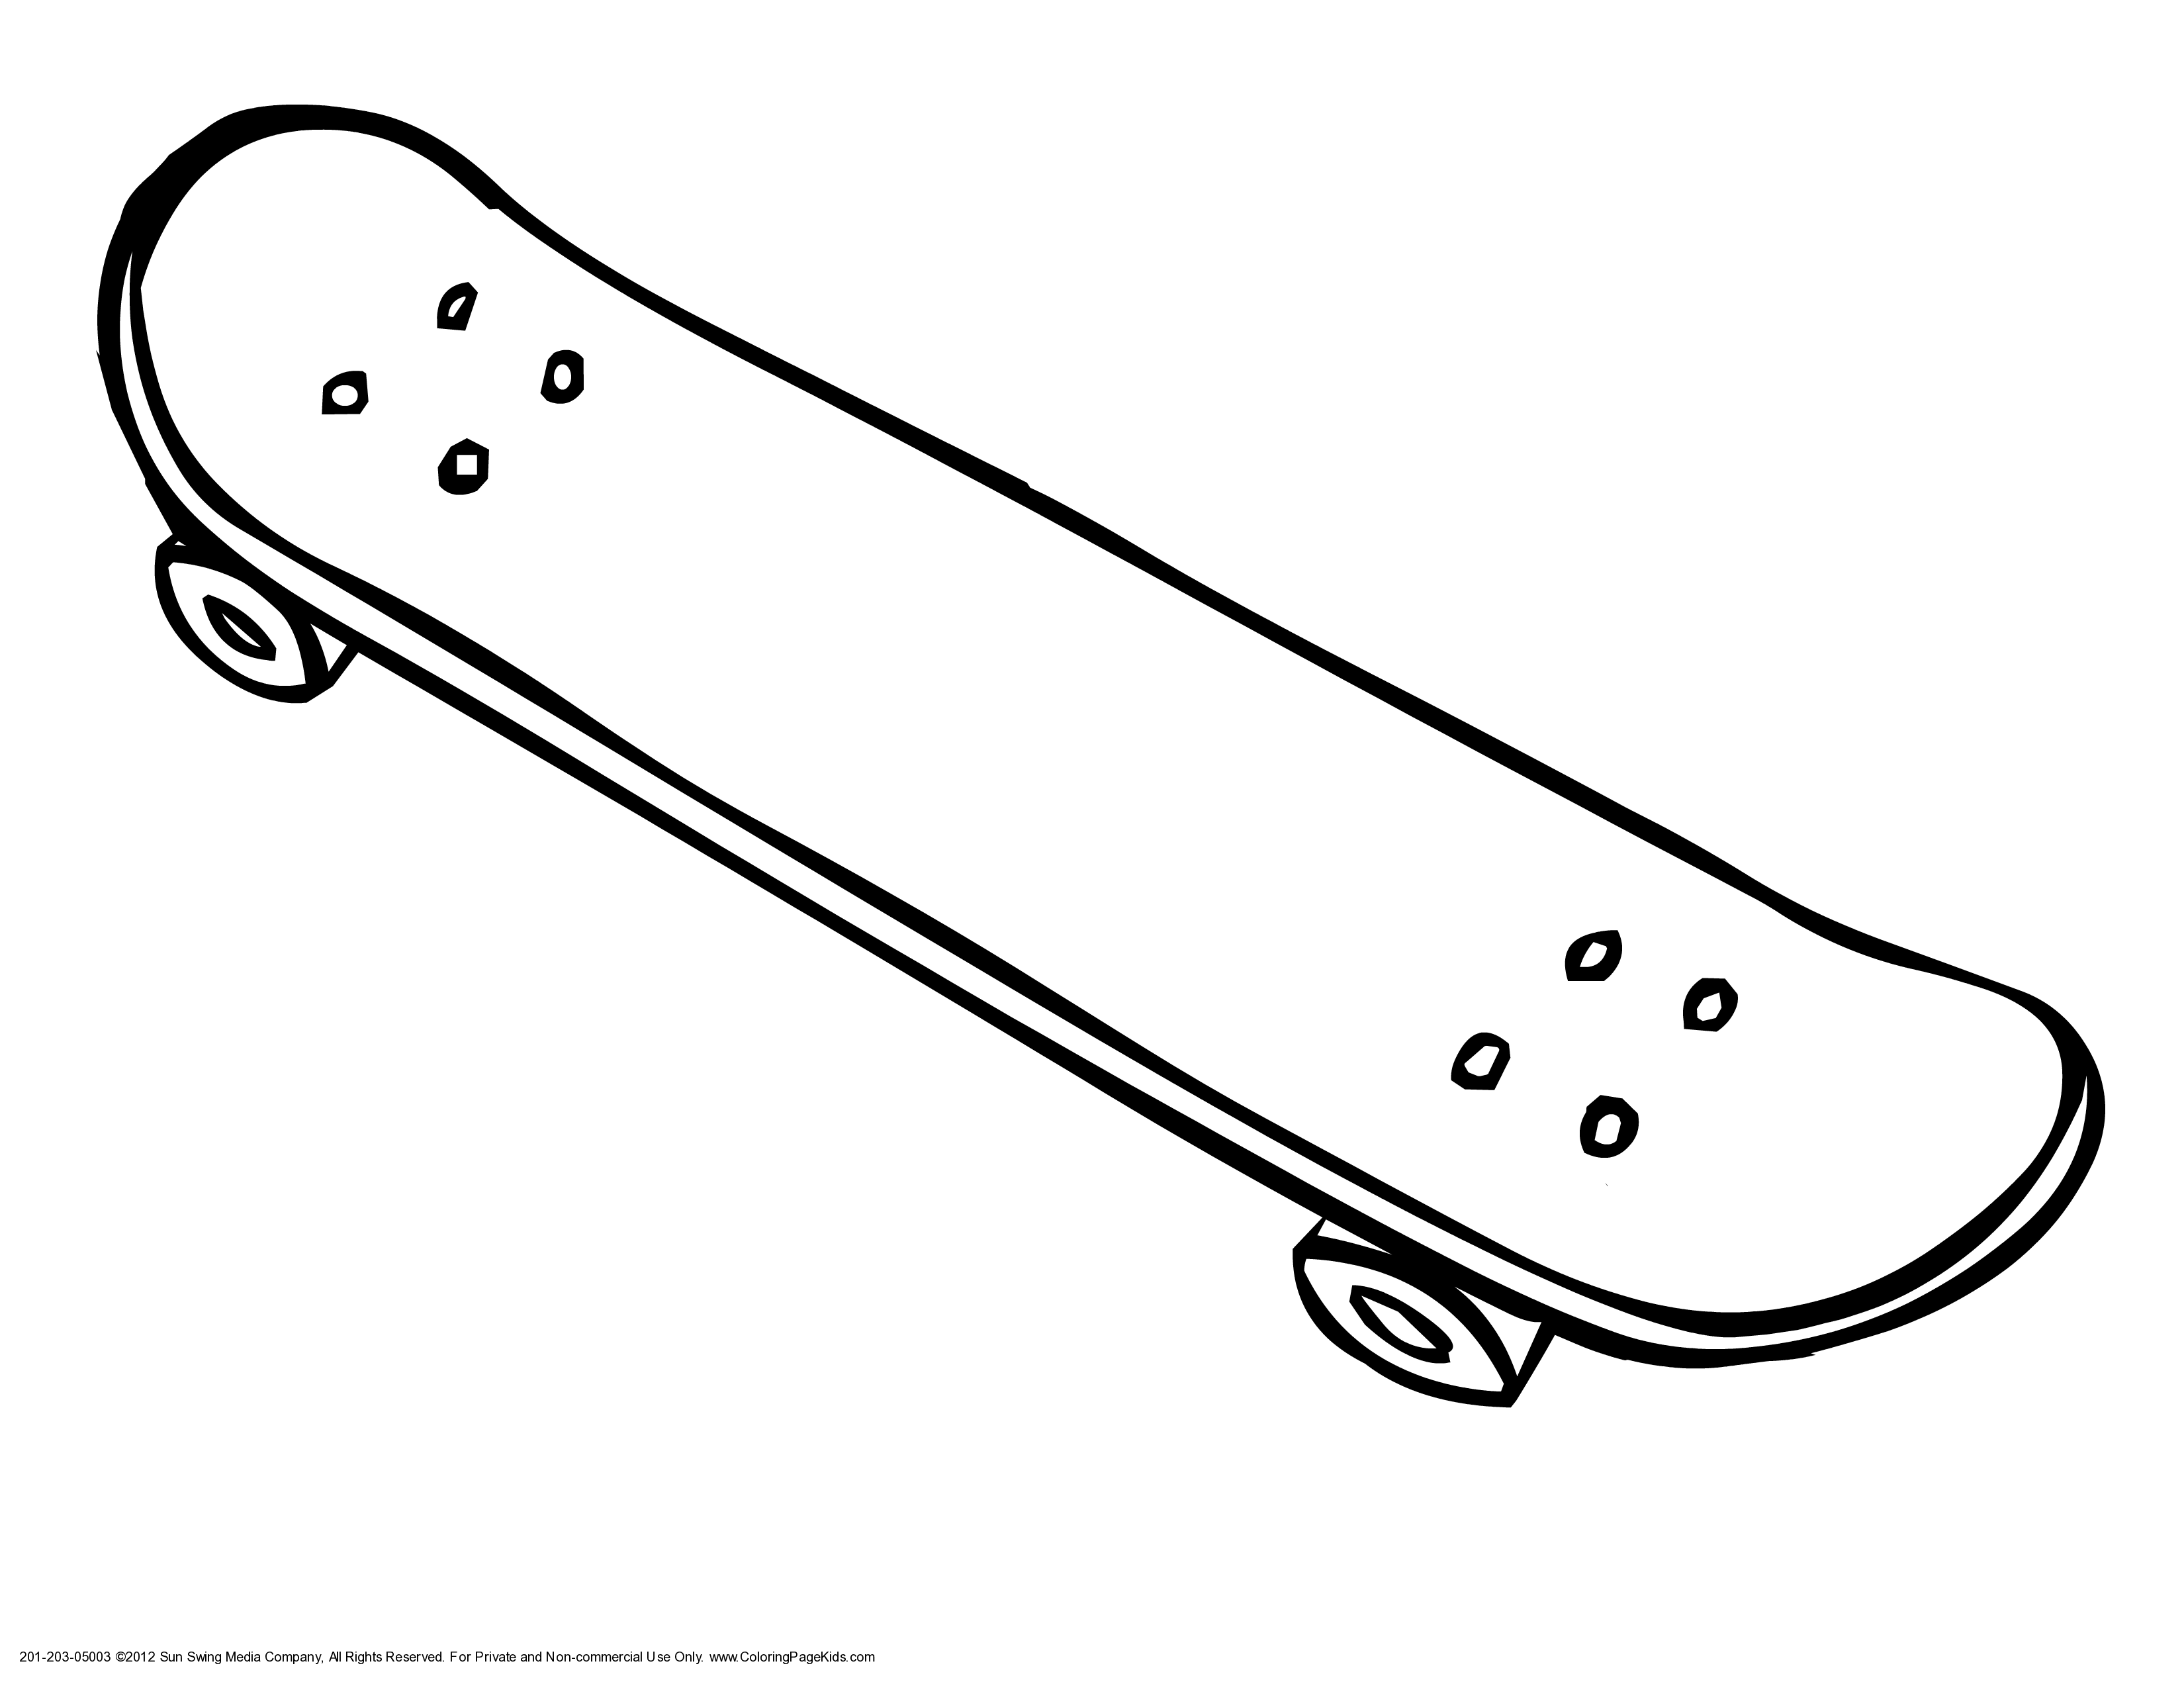 Skateboard clipart free images image 3 clipartix